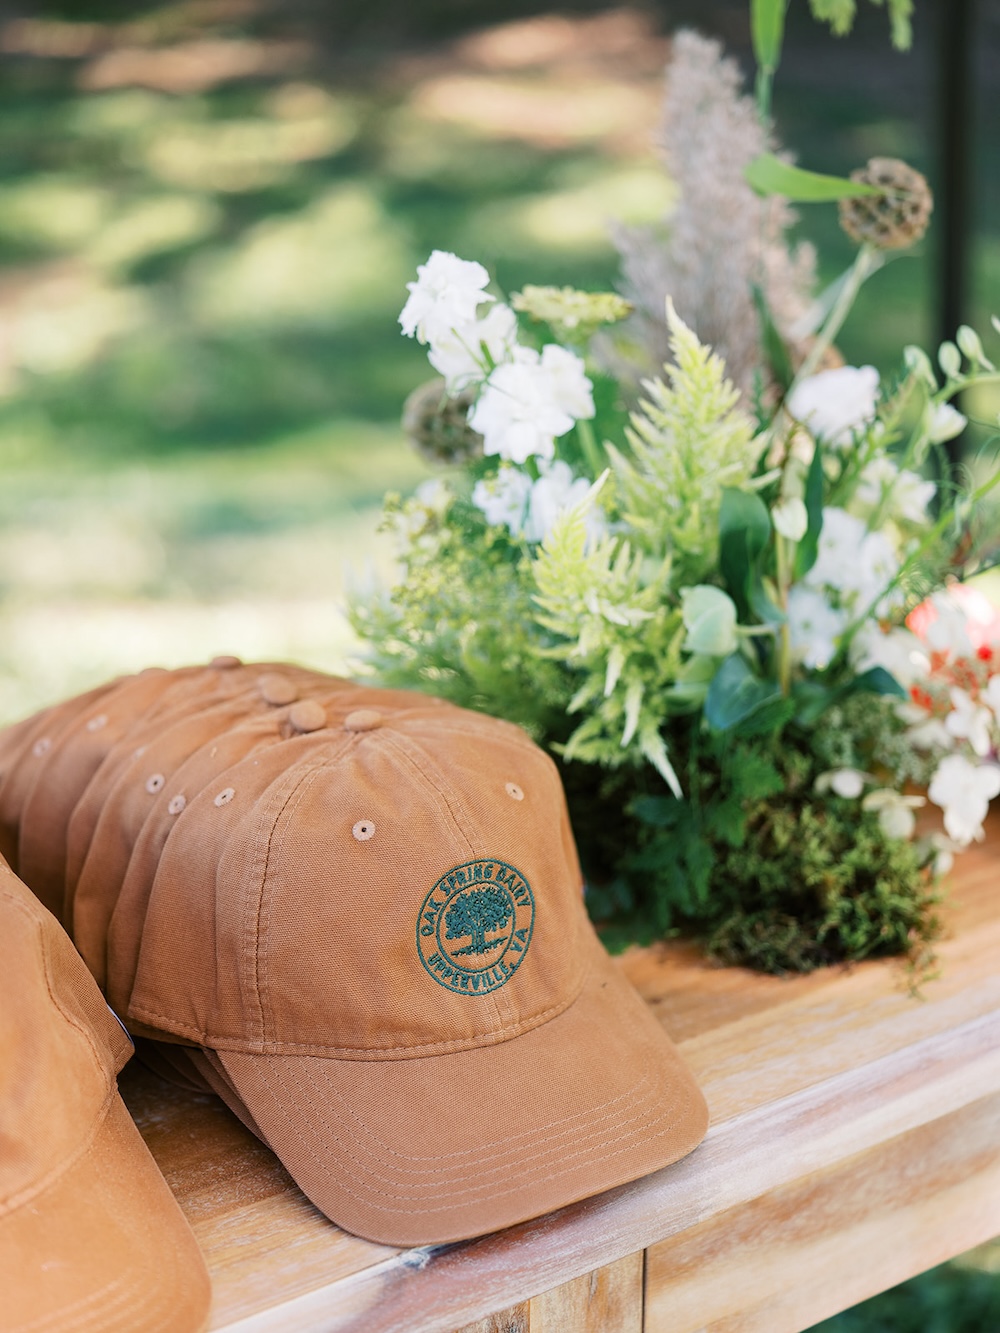 Custom branded hats, unique party favor idea. Milestone birthday party celebration weekend in Middleburg, Virginia. Sarah Bradshaw Photography.